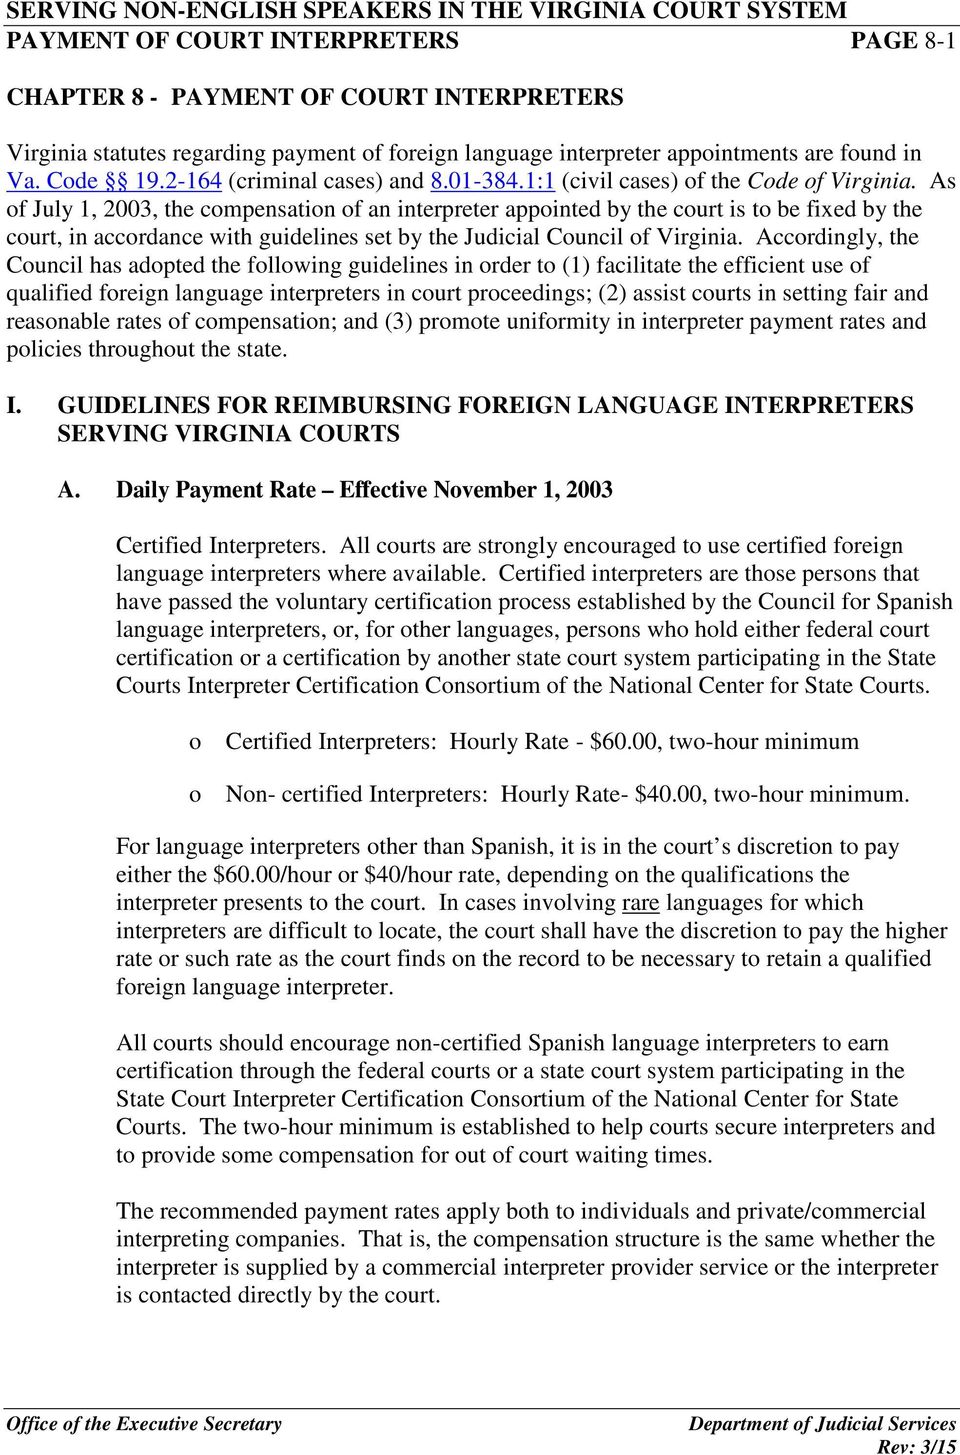 As of July 1, 2003, the compensation of an interpreter appointed by the court is to be fixed by the court, in accordance with guidelines set by the Judicial Council of Virginia.